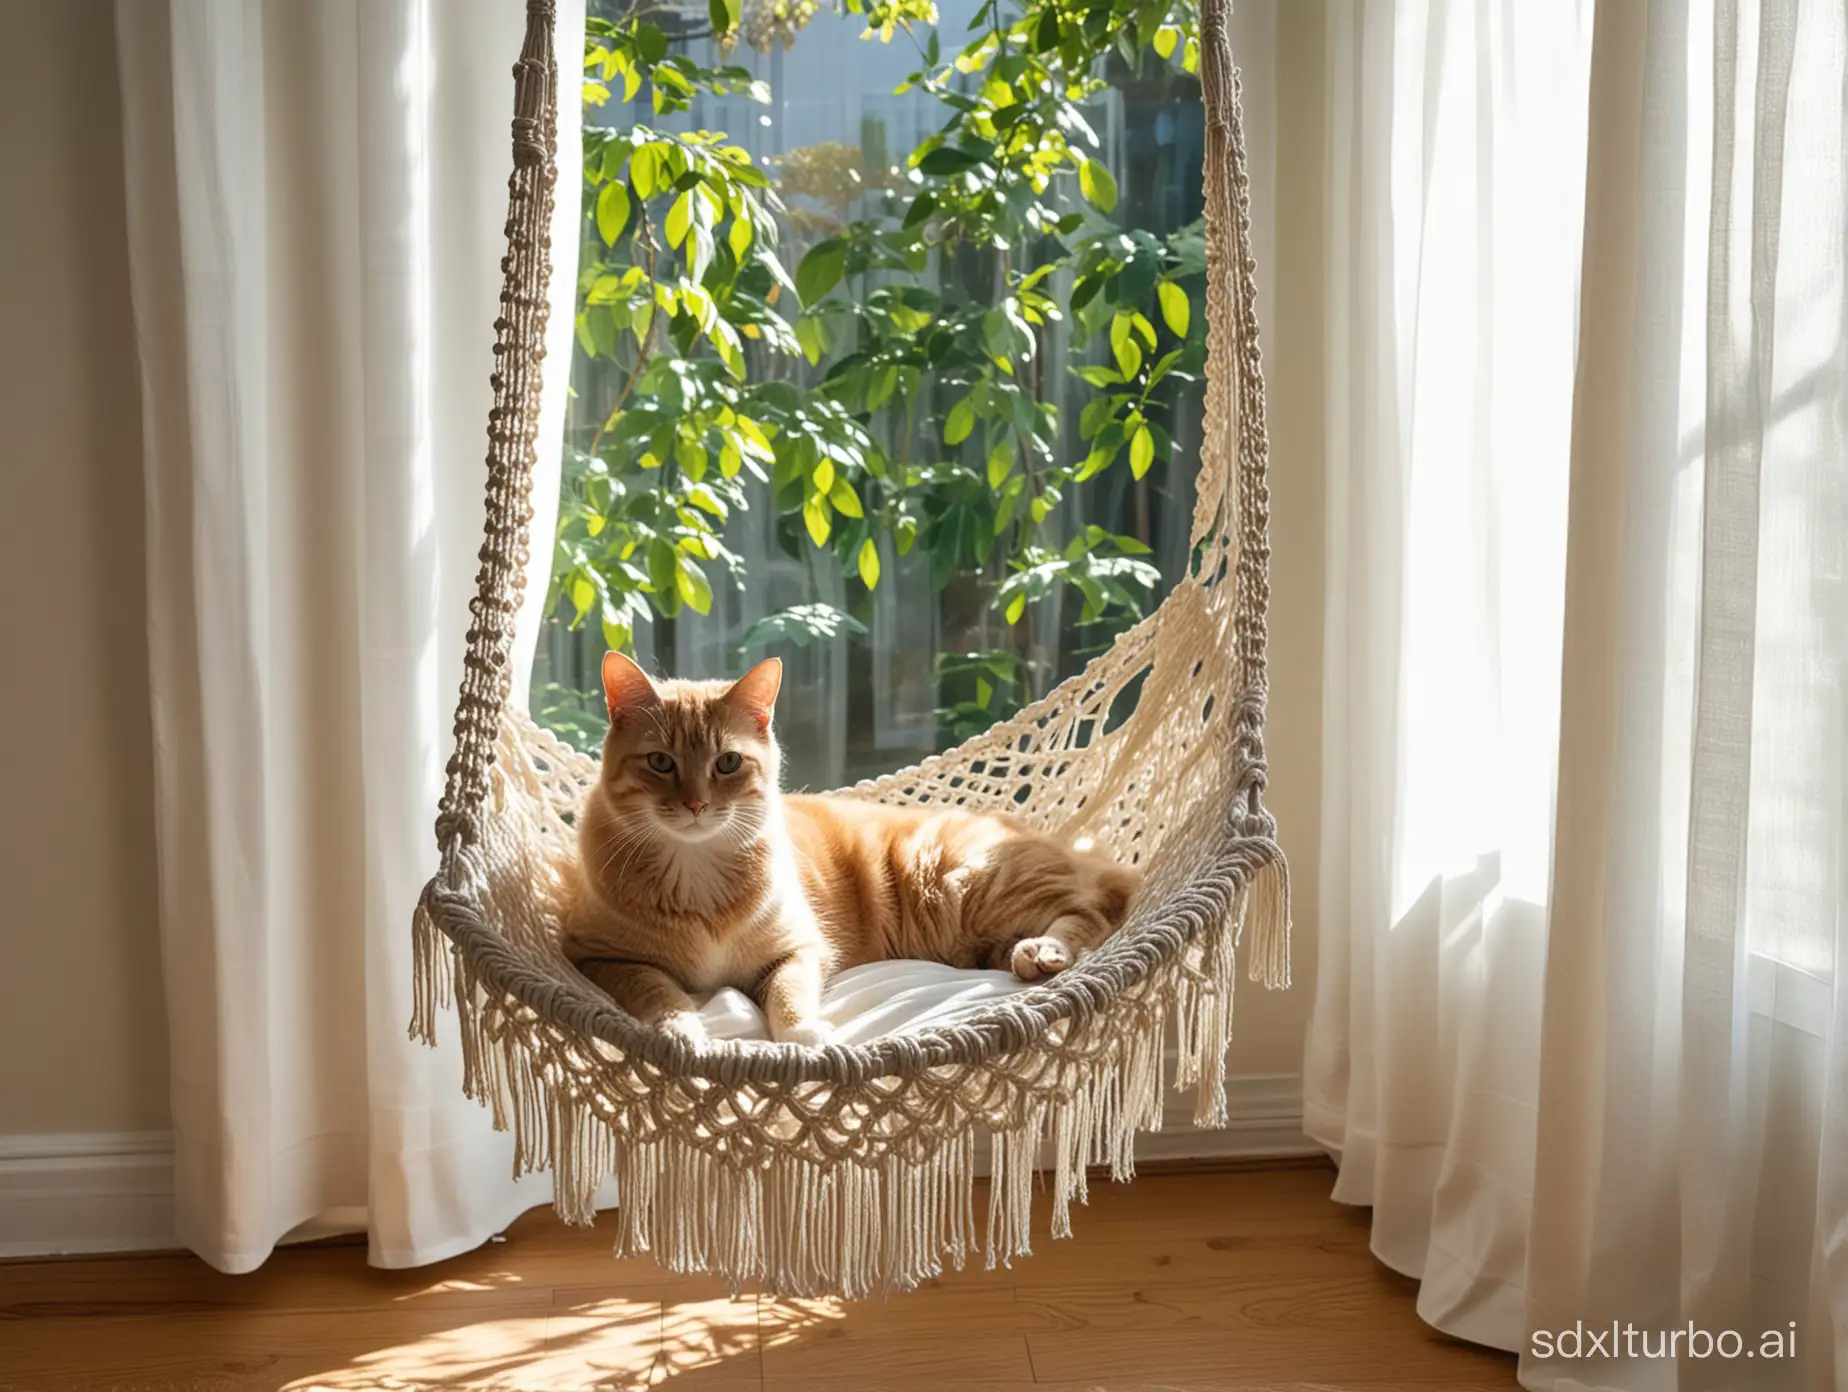 Sunlit-Macrame-Cat-Hammock-with-Blowing-Curtains-and-Tree-Shadow